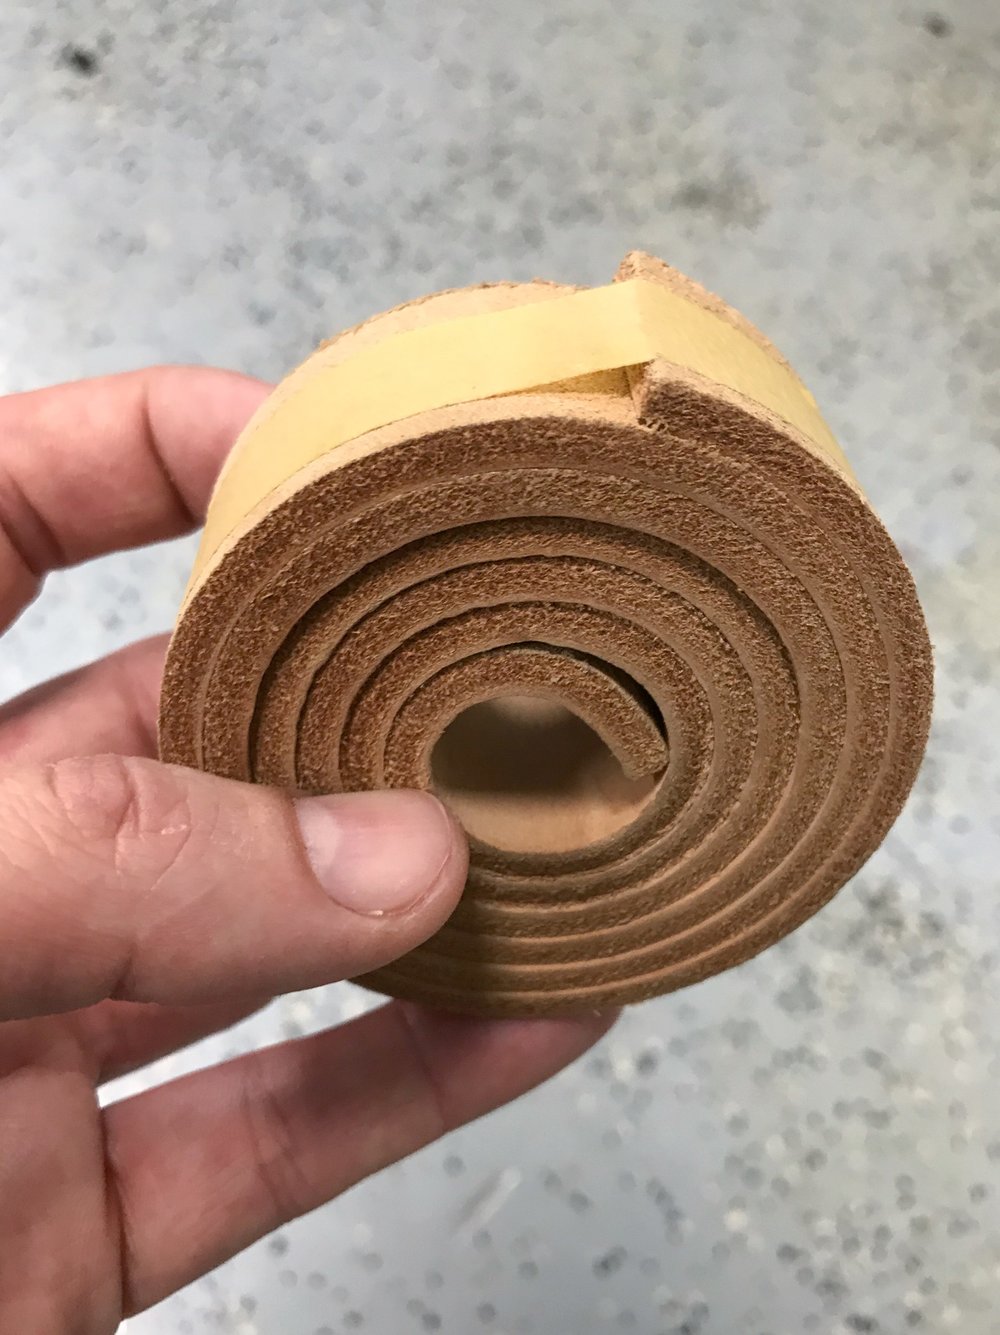  this is the unused leather strap that goes on the scraper bar for lithography. the other side of the leather is smooth for going across a greased tympan when printing lithos.  